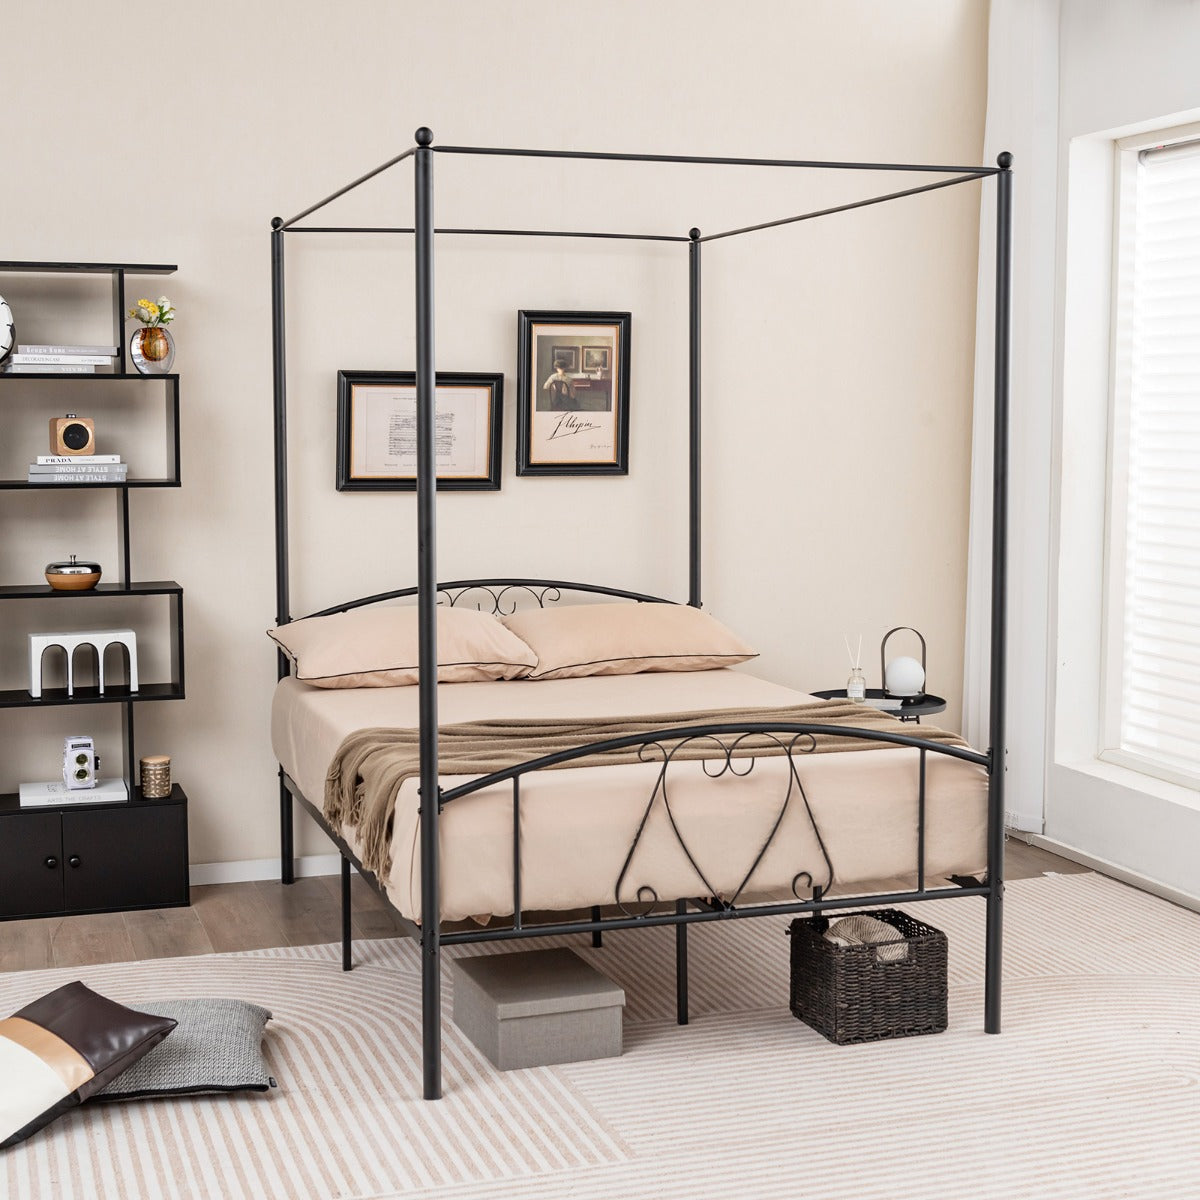 Double Size Metal Canopy Bed Frame-Black